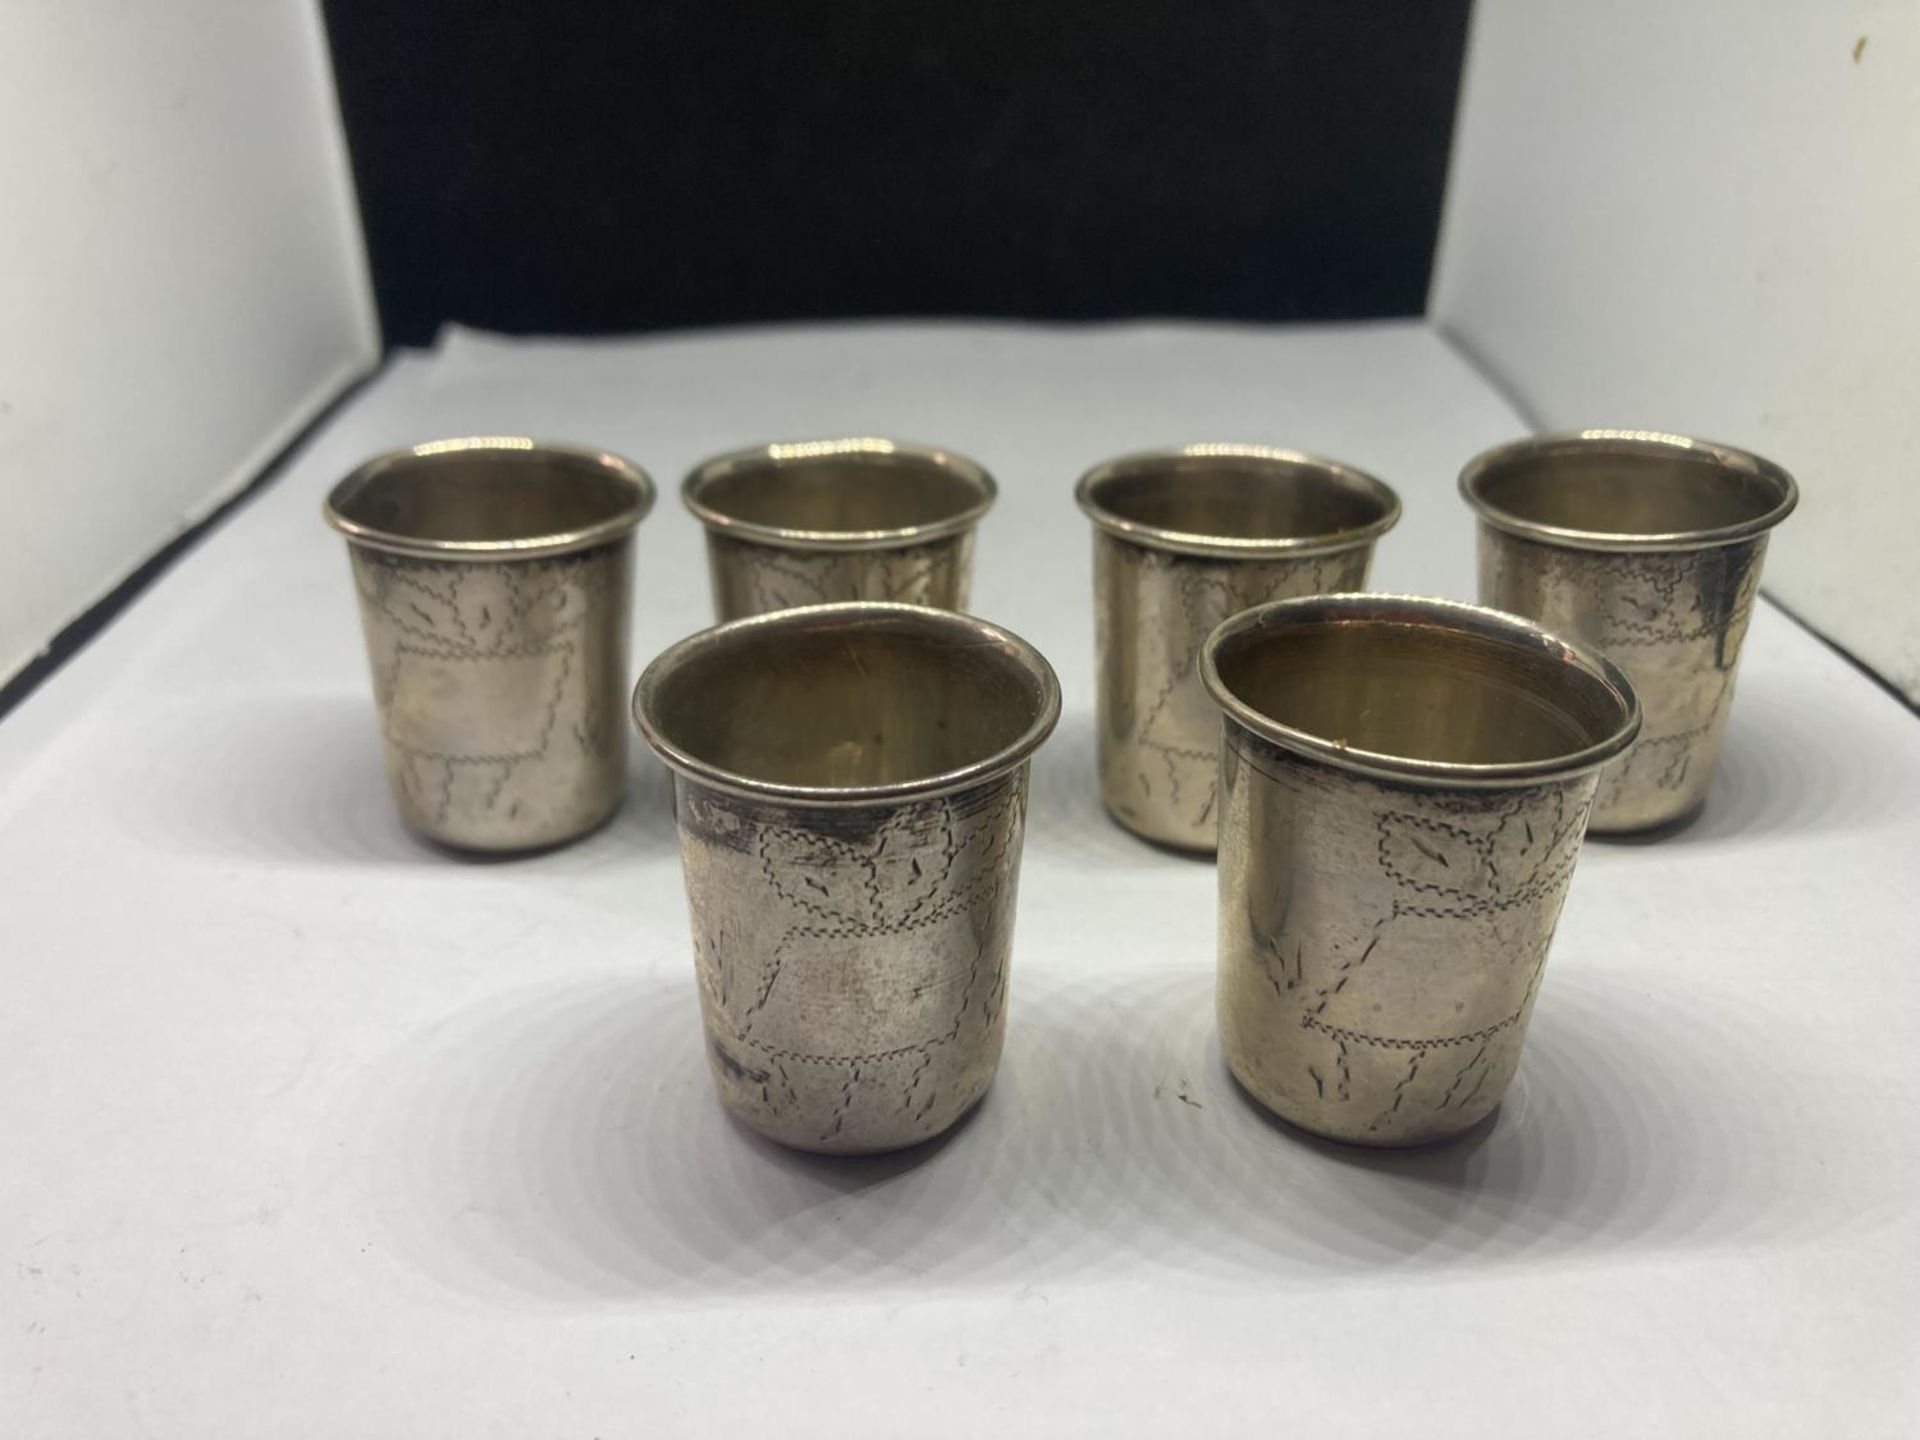 SIX STIRRUP CUPS MARKET LO SILVER 833 GROSS WEIGHT 48 GRAMS